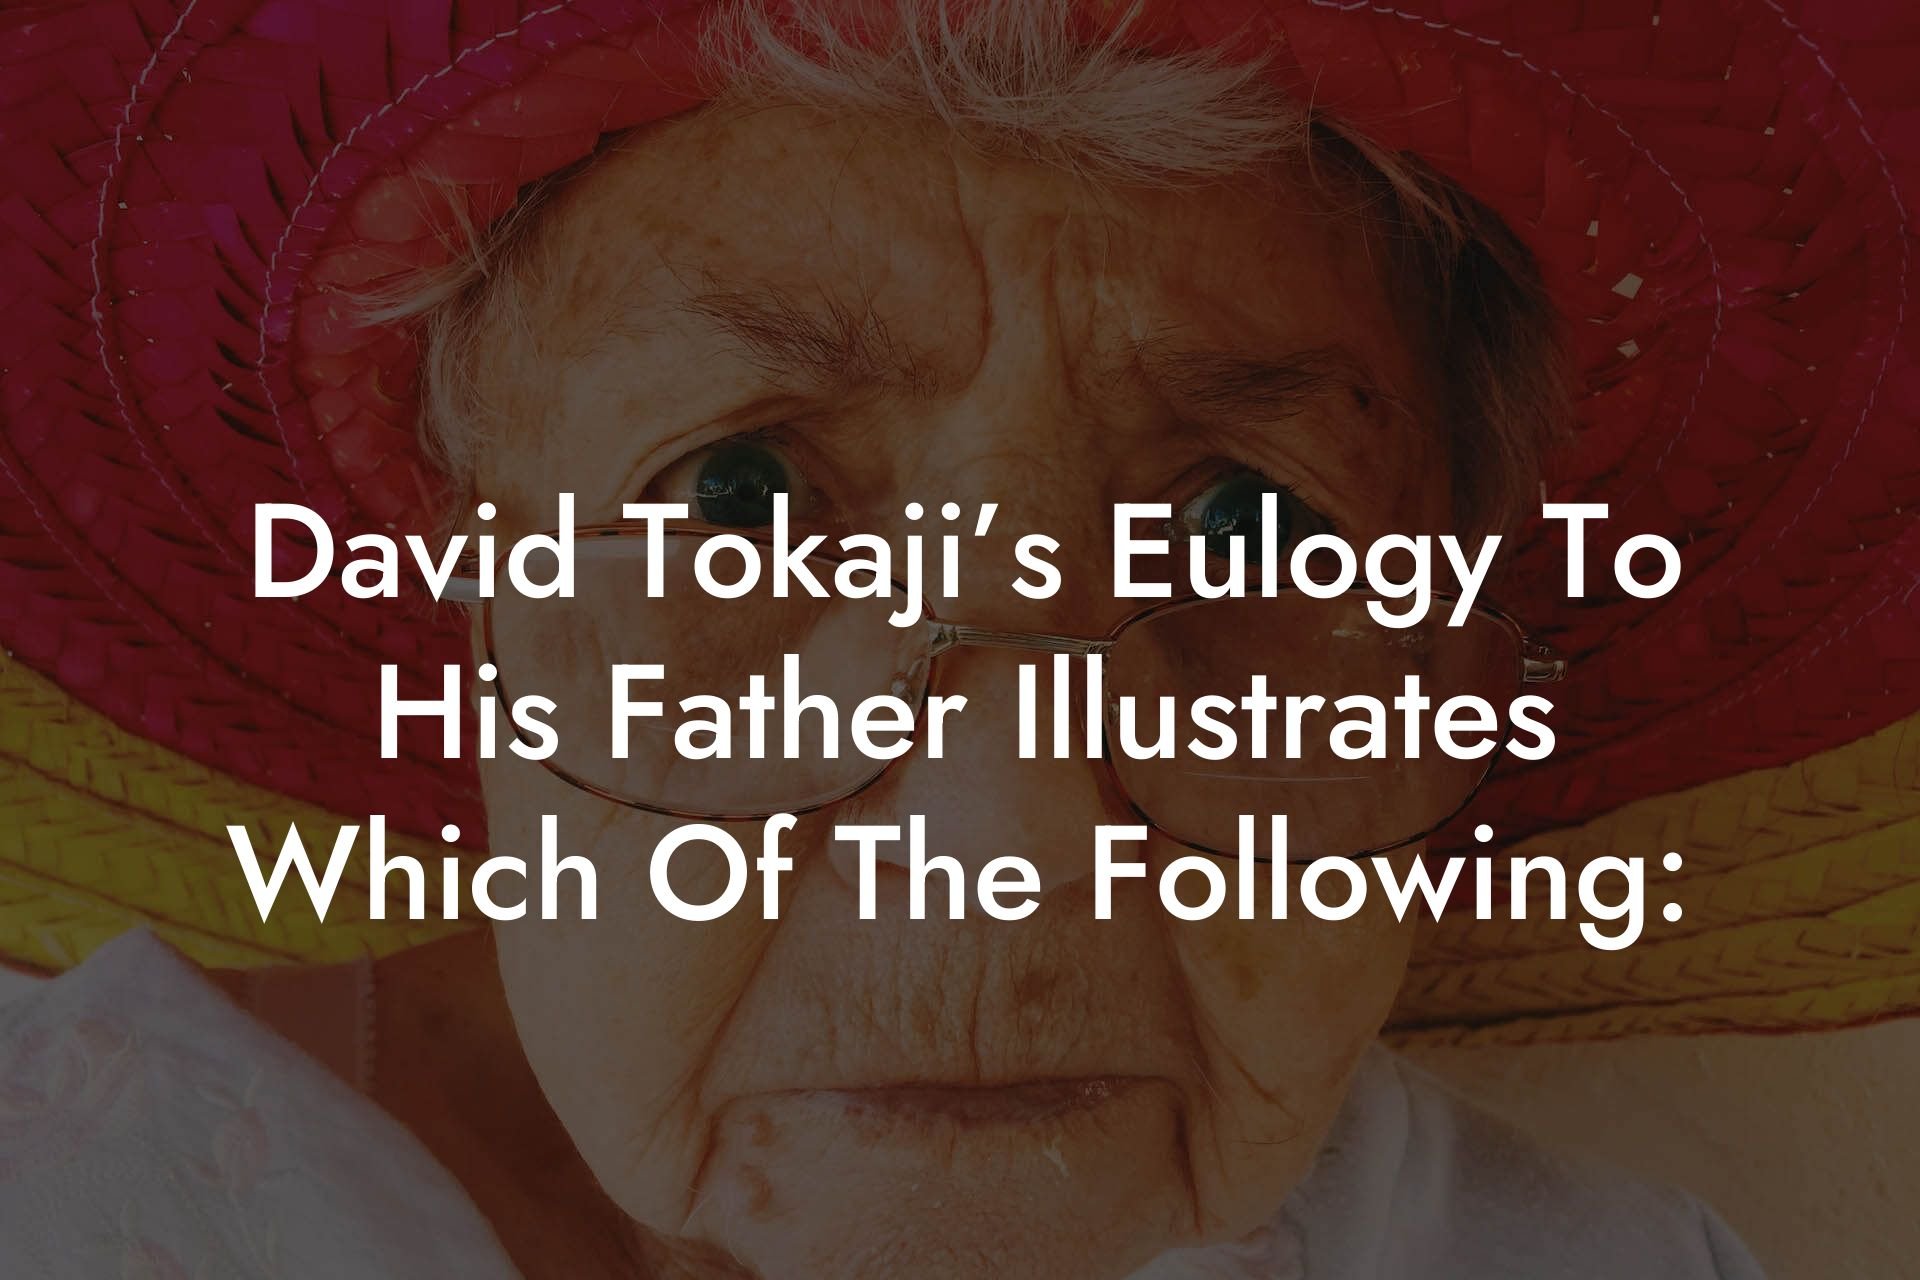 David Tokaji’s Eulogy To His Father Illustrates Which Of The Following: